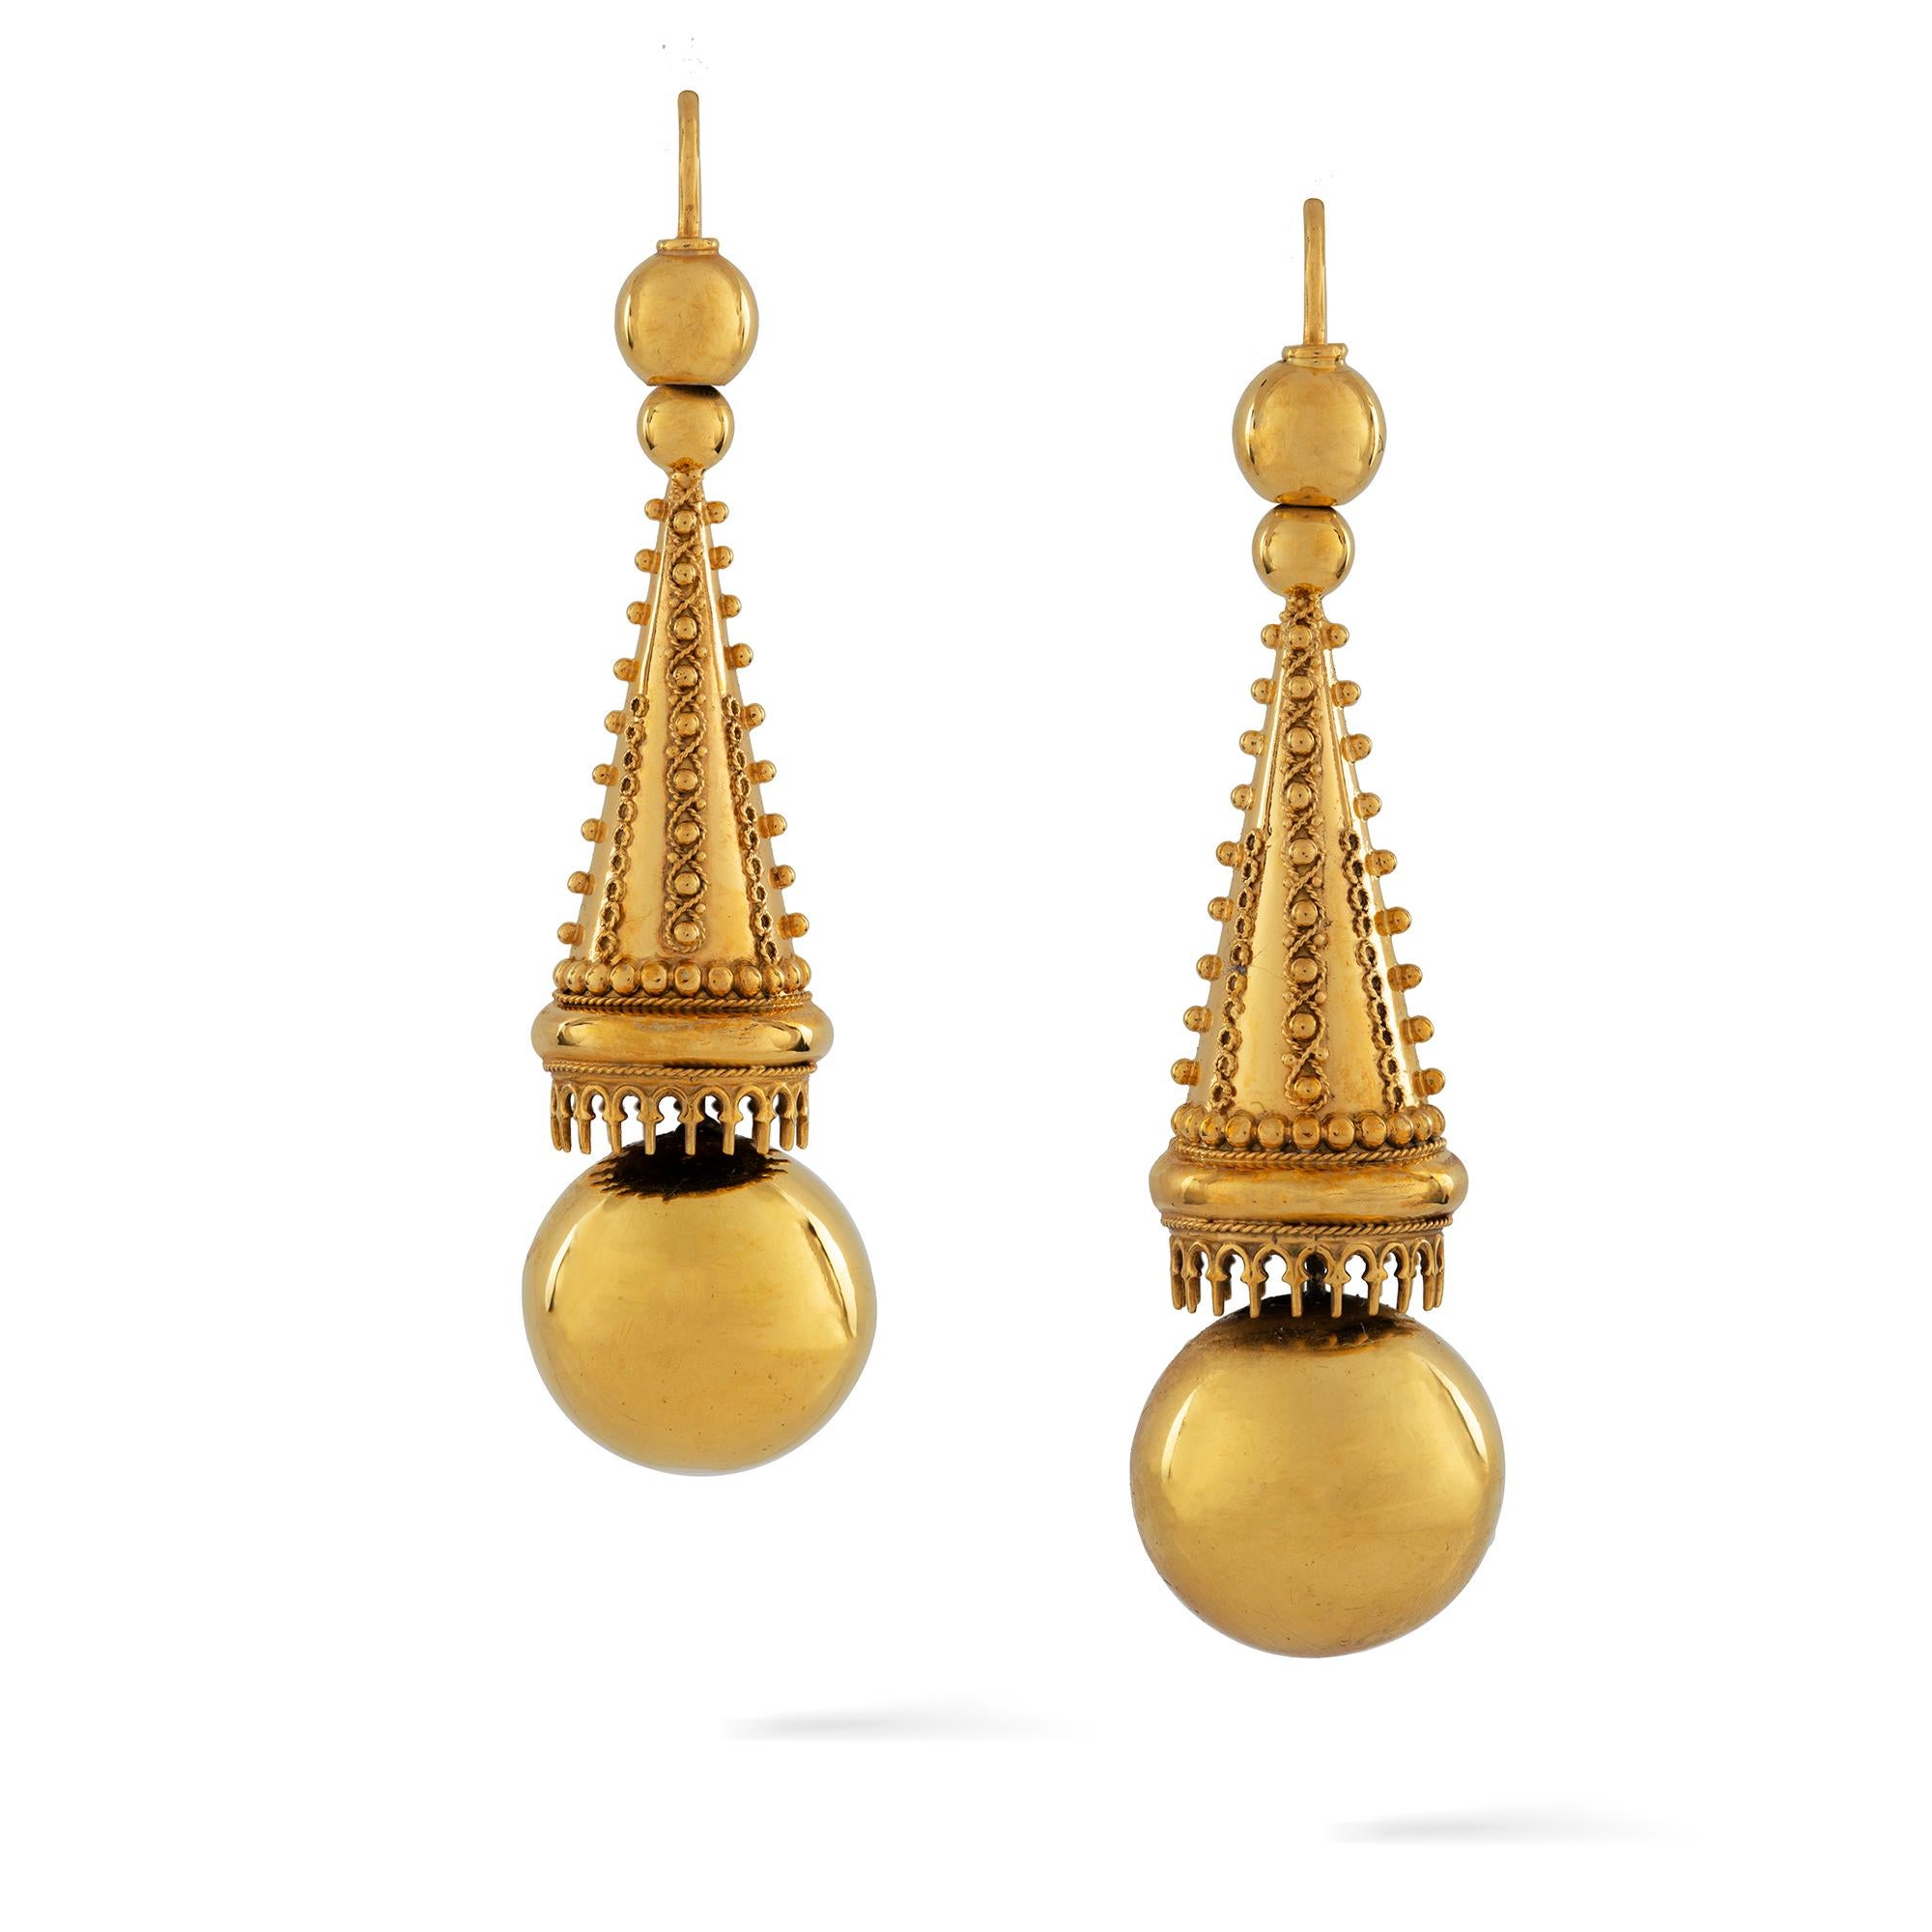 A pair of Victorian gold archaeological revival drop earrings, each earring consisted of a sphere, suspended by a cone, bearing twisted-rope and bead decorations, suspended by two graduated spheres, all to a shepherd's hook fitting, 18ct yellow